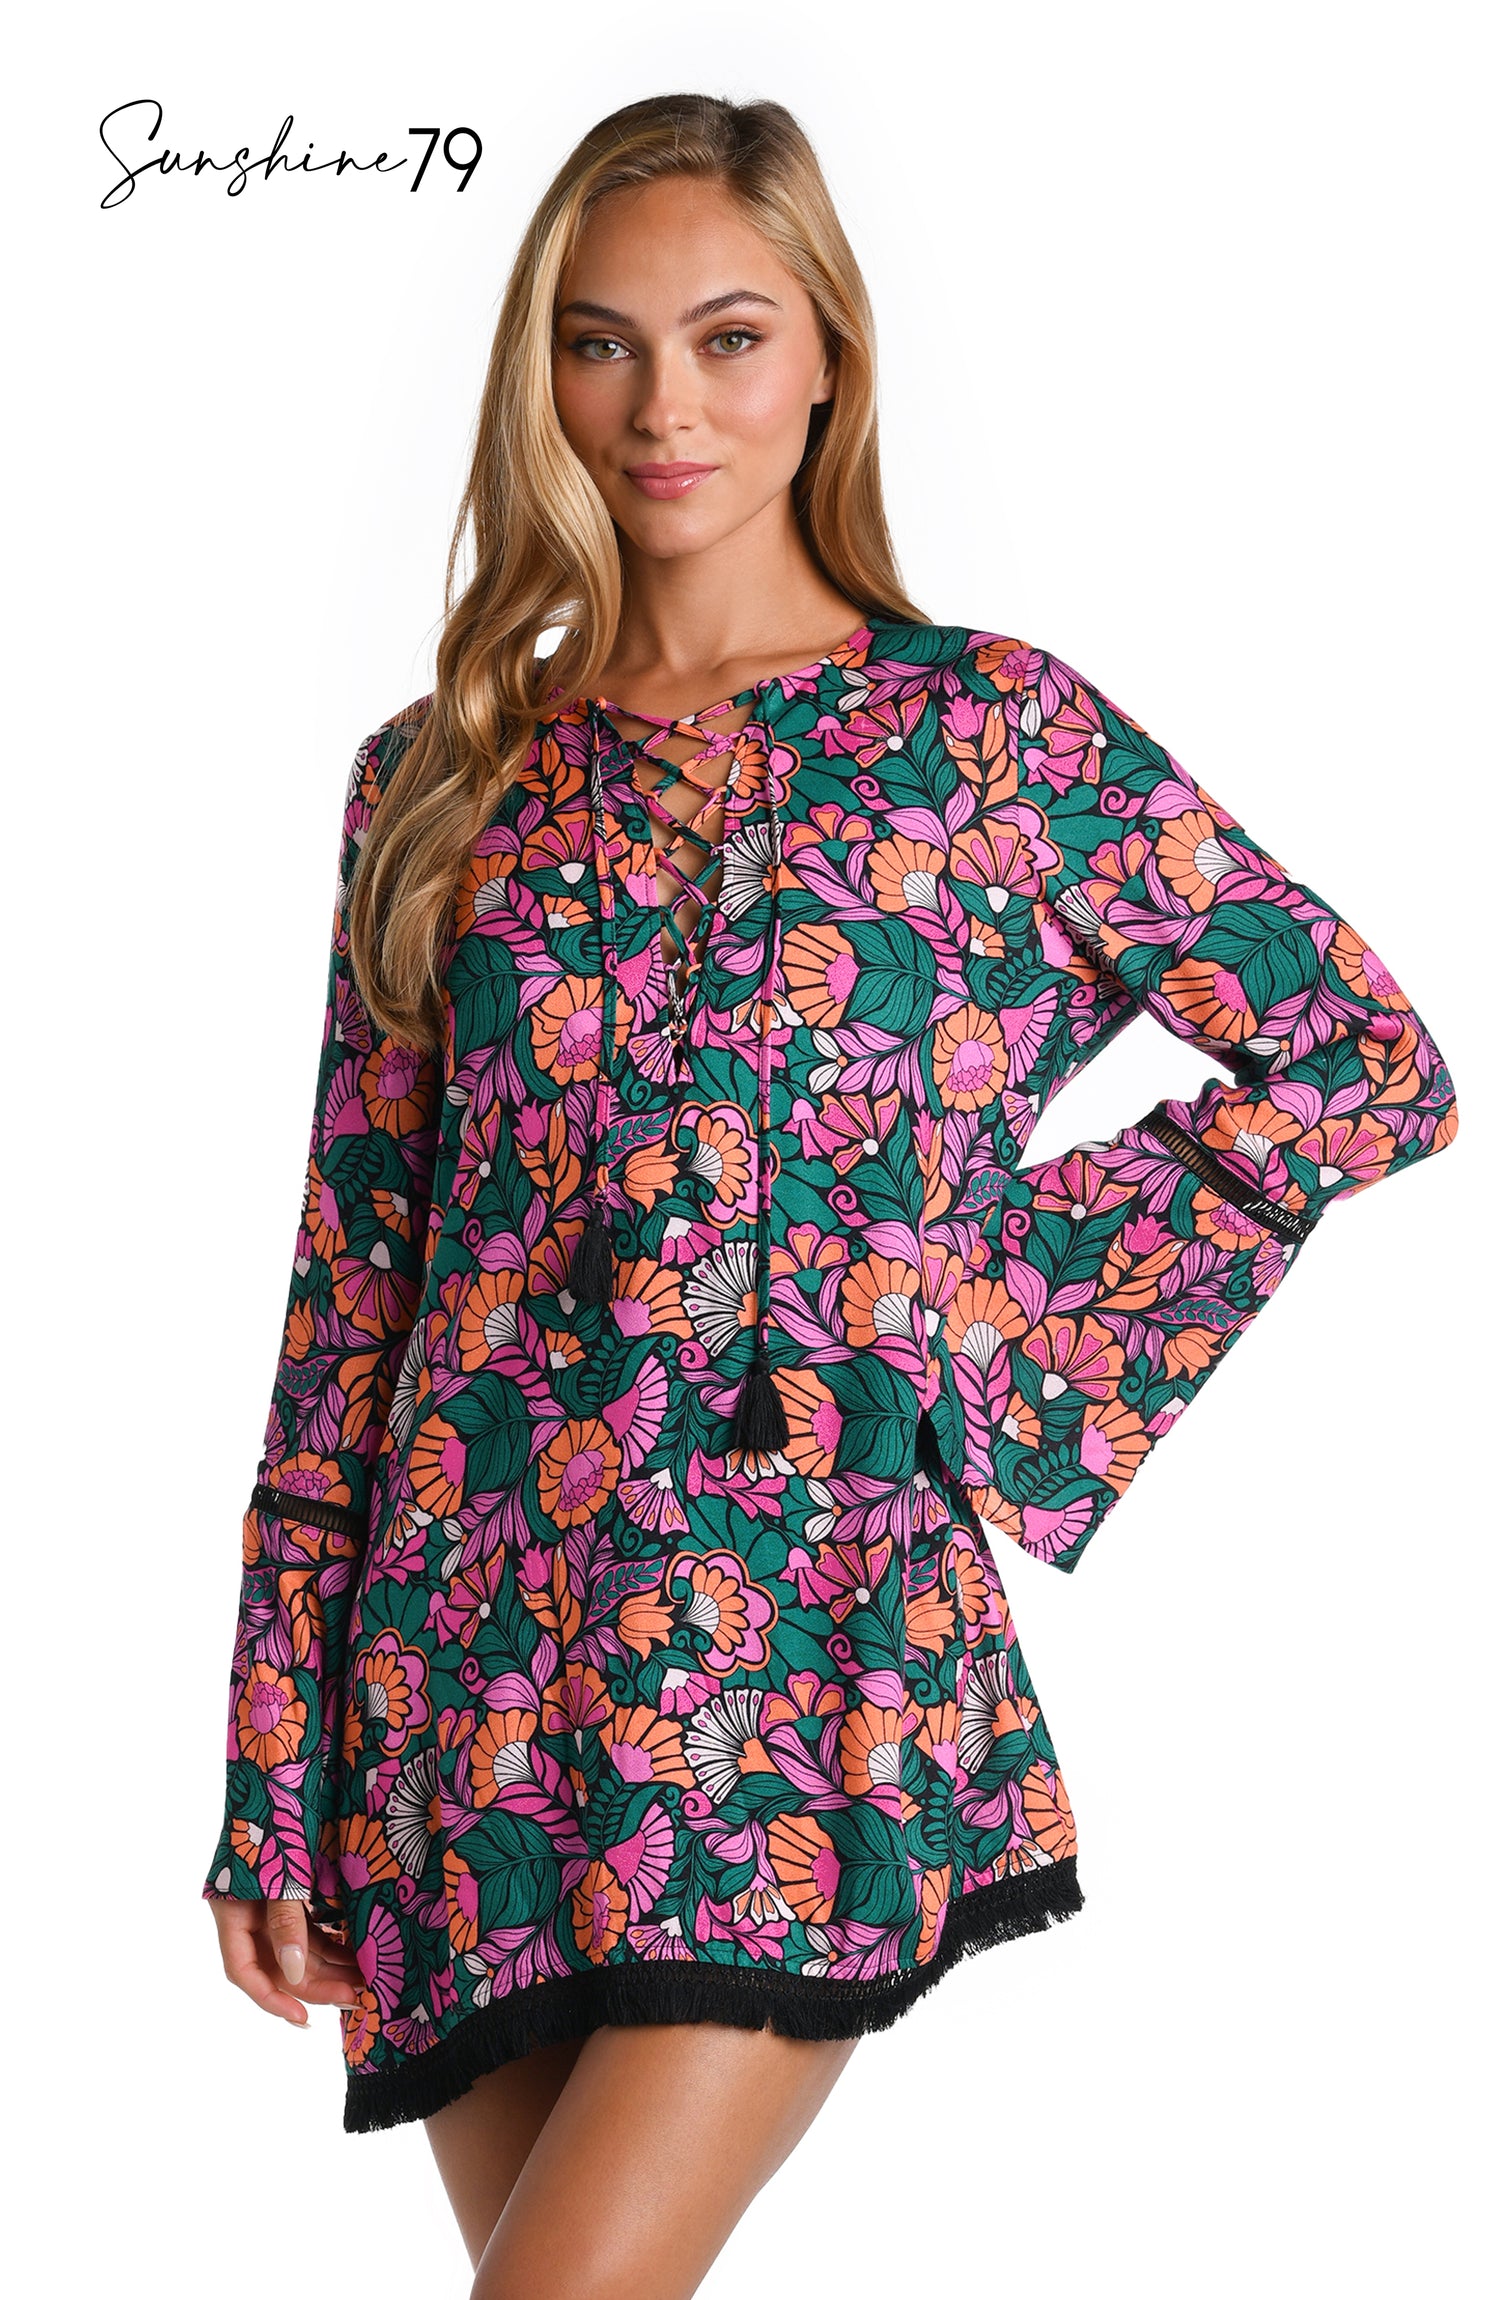 Model is wearing a multicolored Short Sleeve Tunic Cover Up Dress